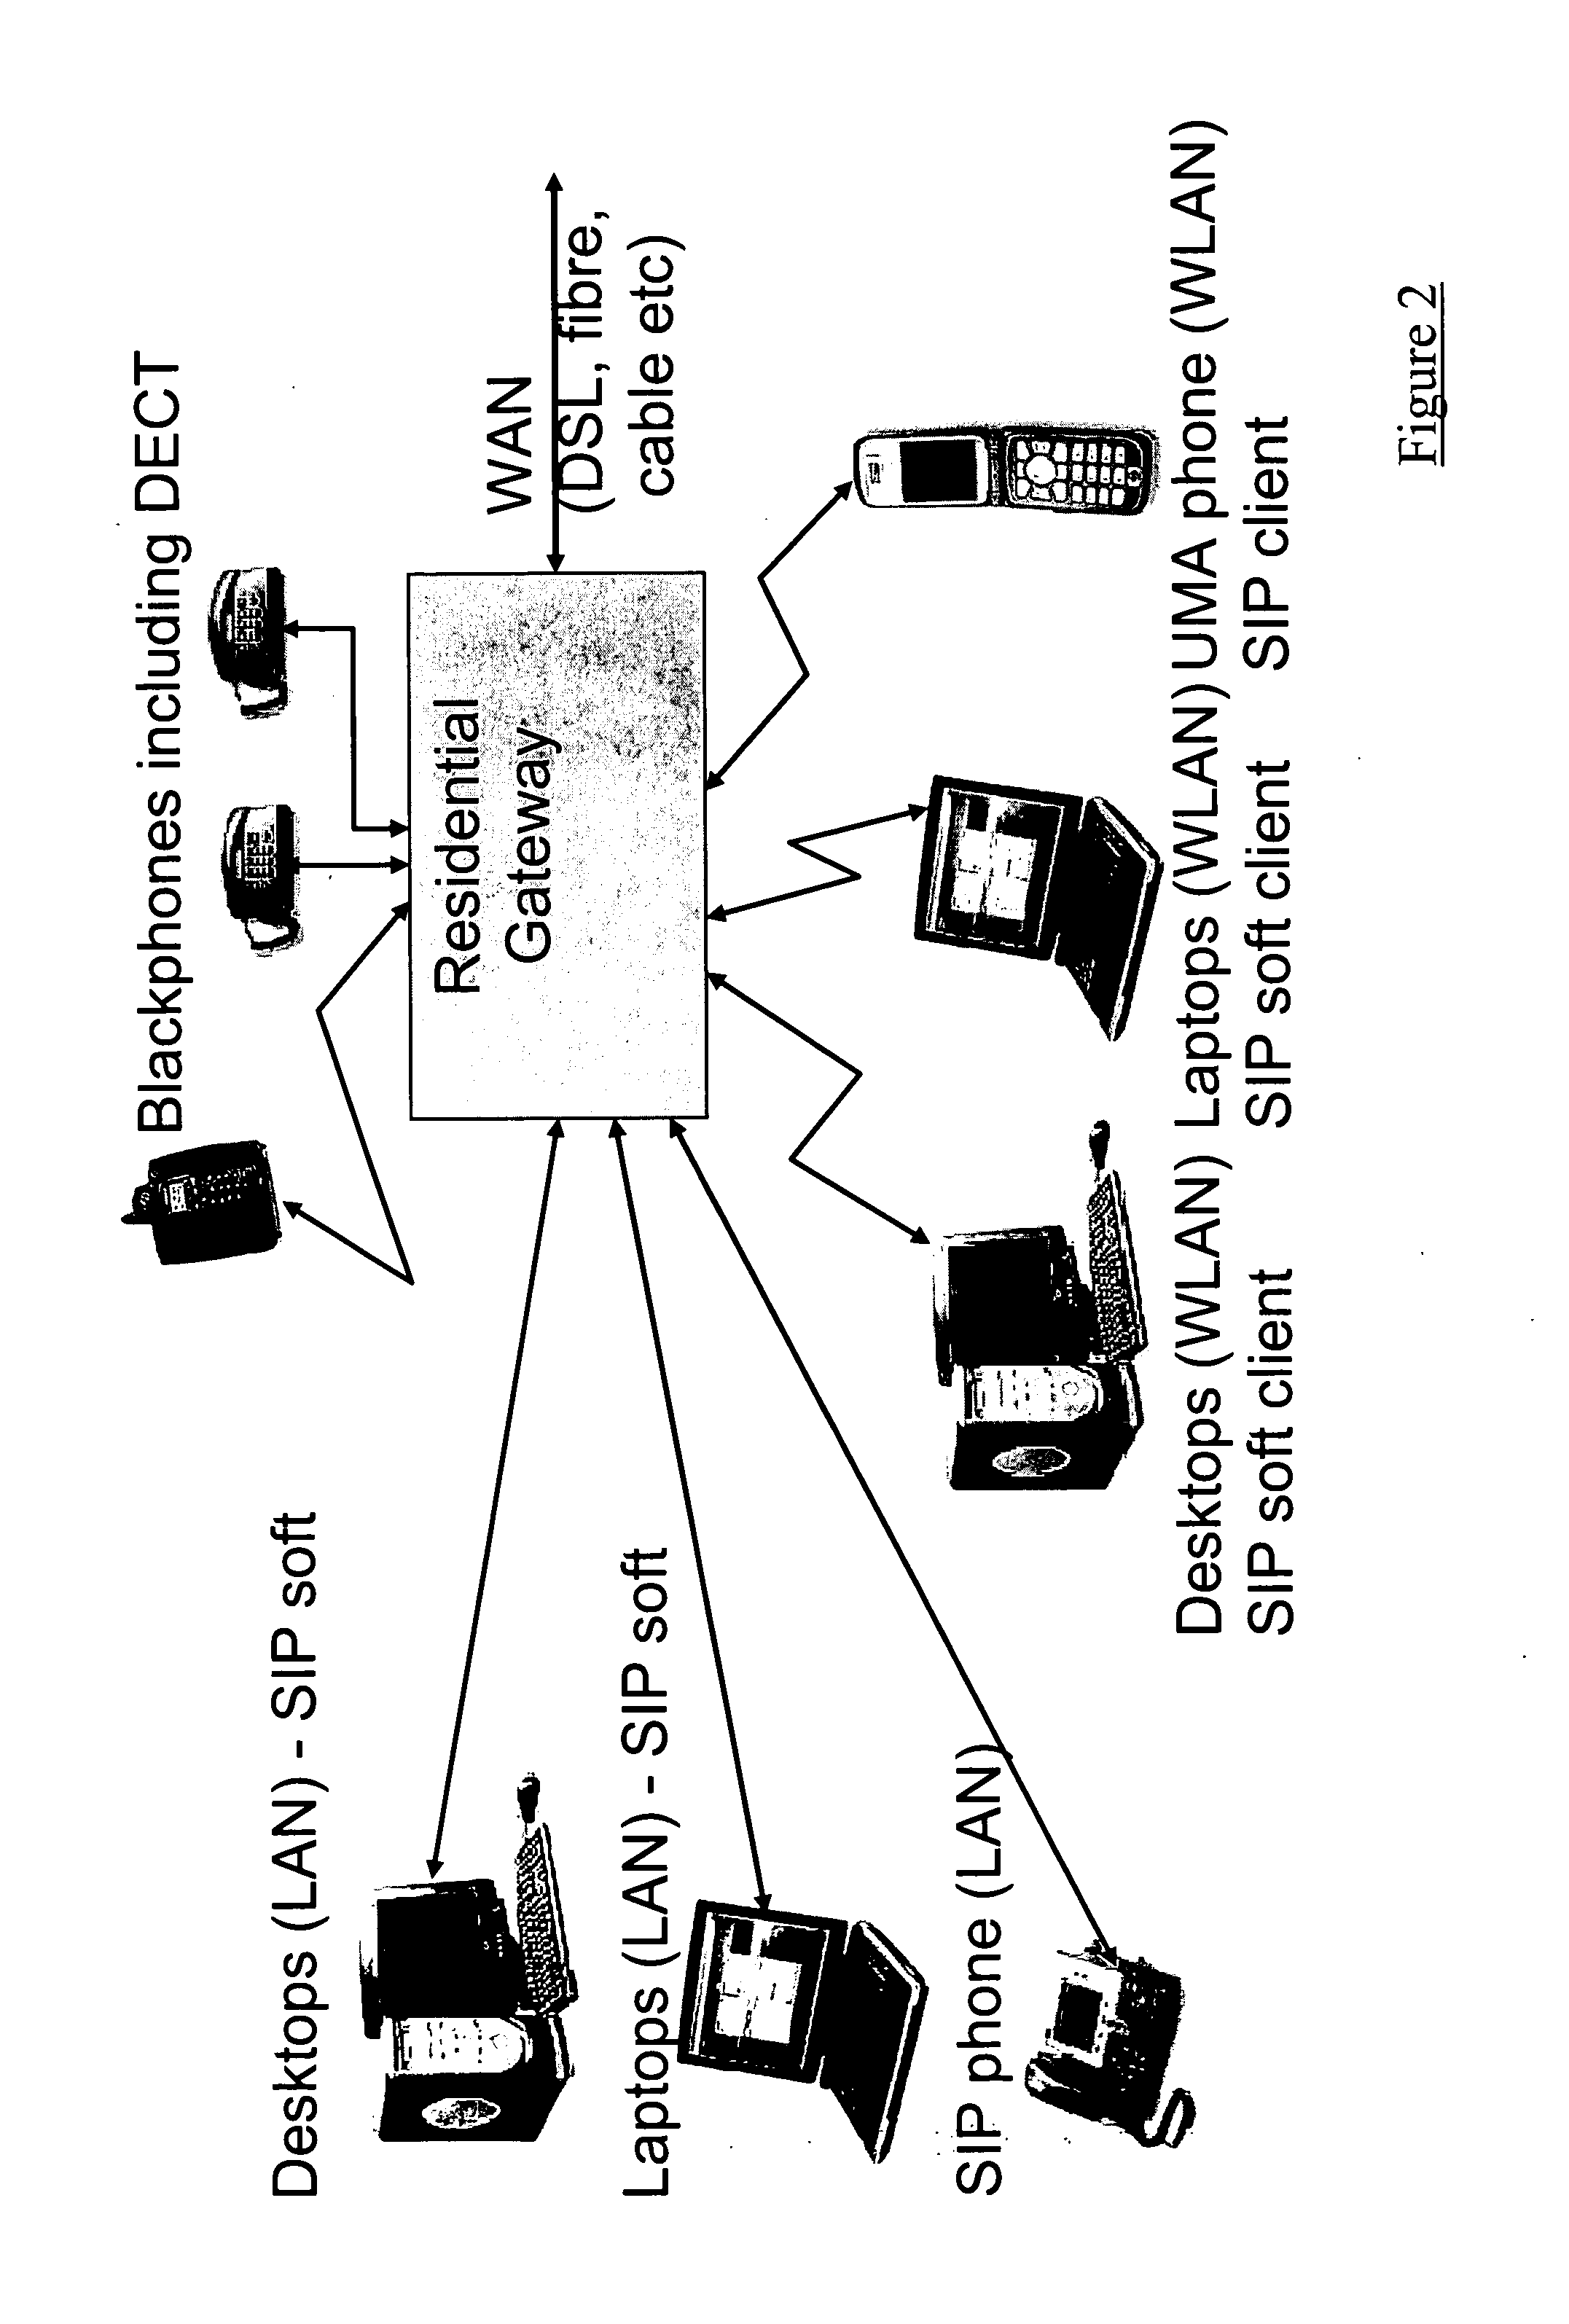 IP multimedia subsystem access method and apparatus